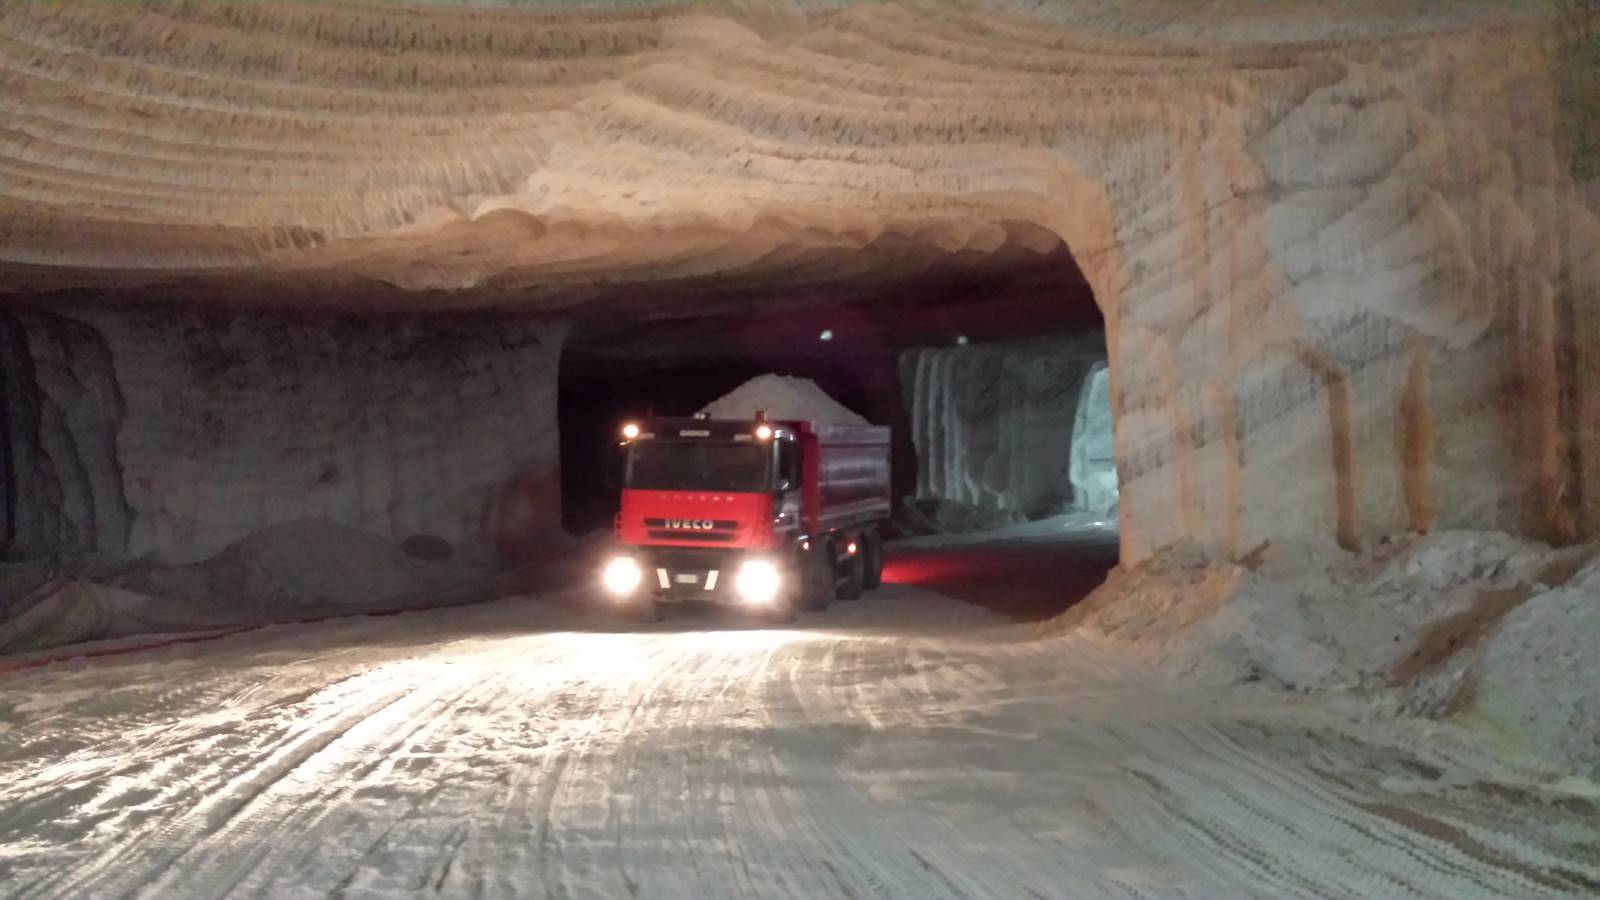 tunnels and ramps ready made for heavy vehicles